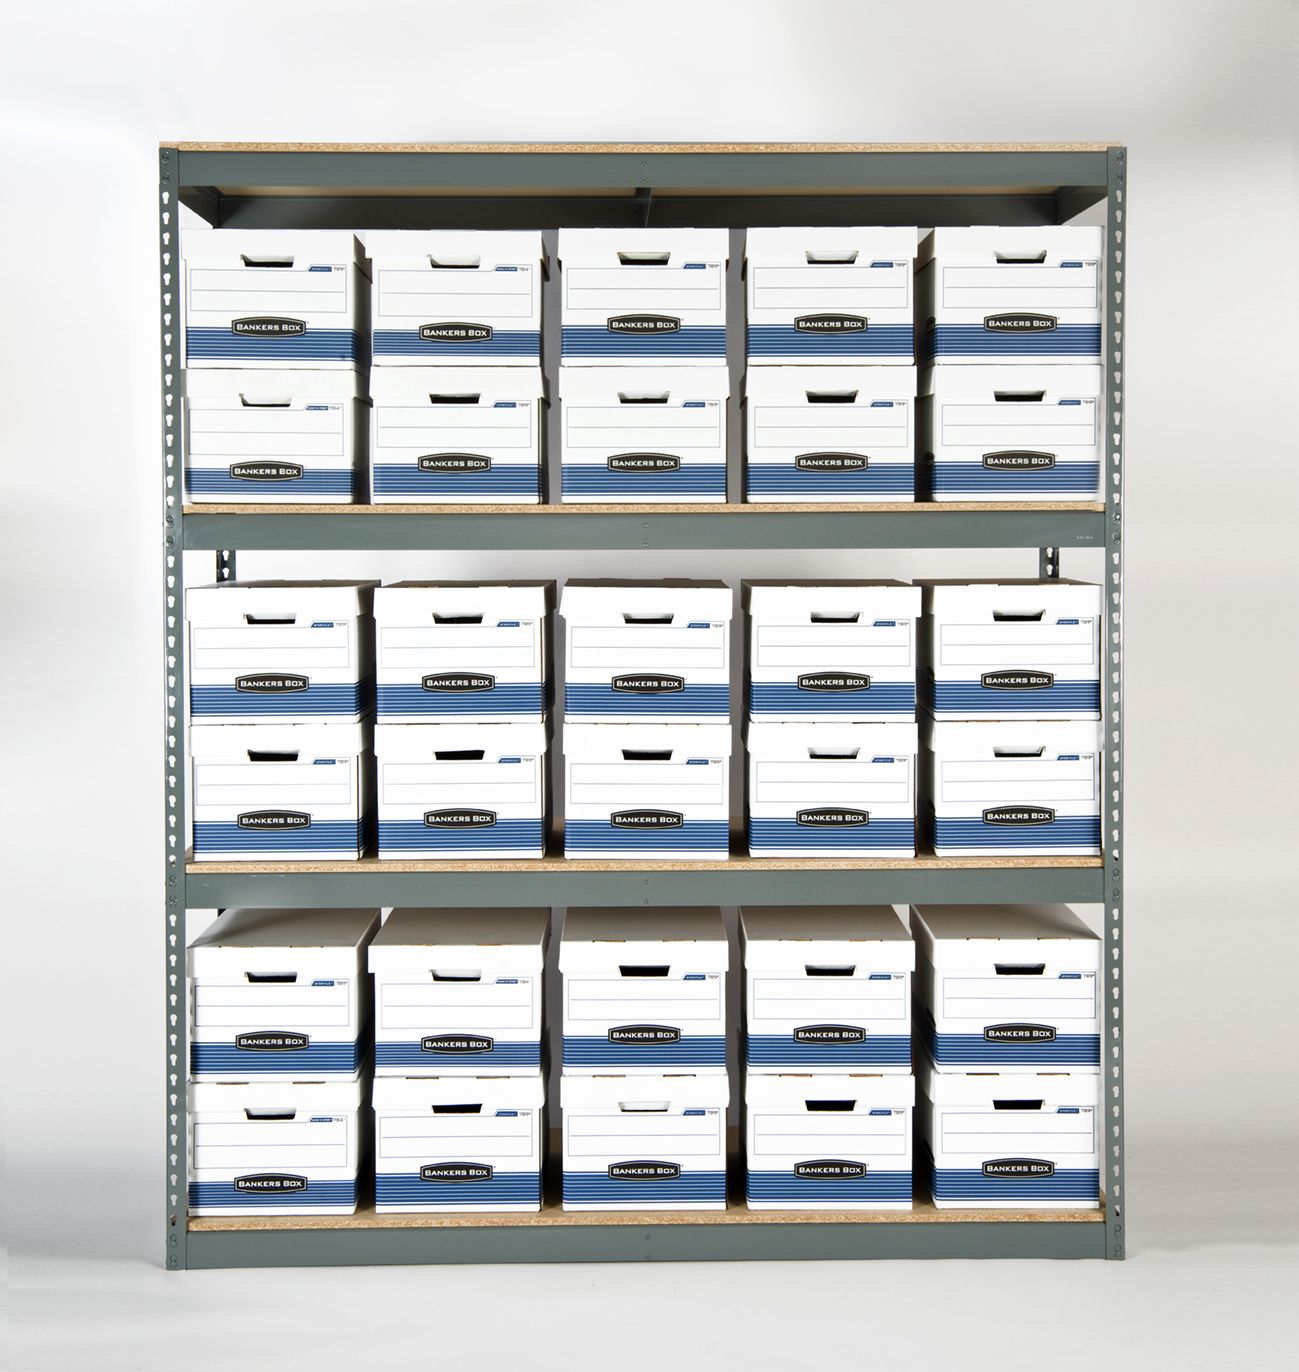 RiveTier II Record Archive Shelving